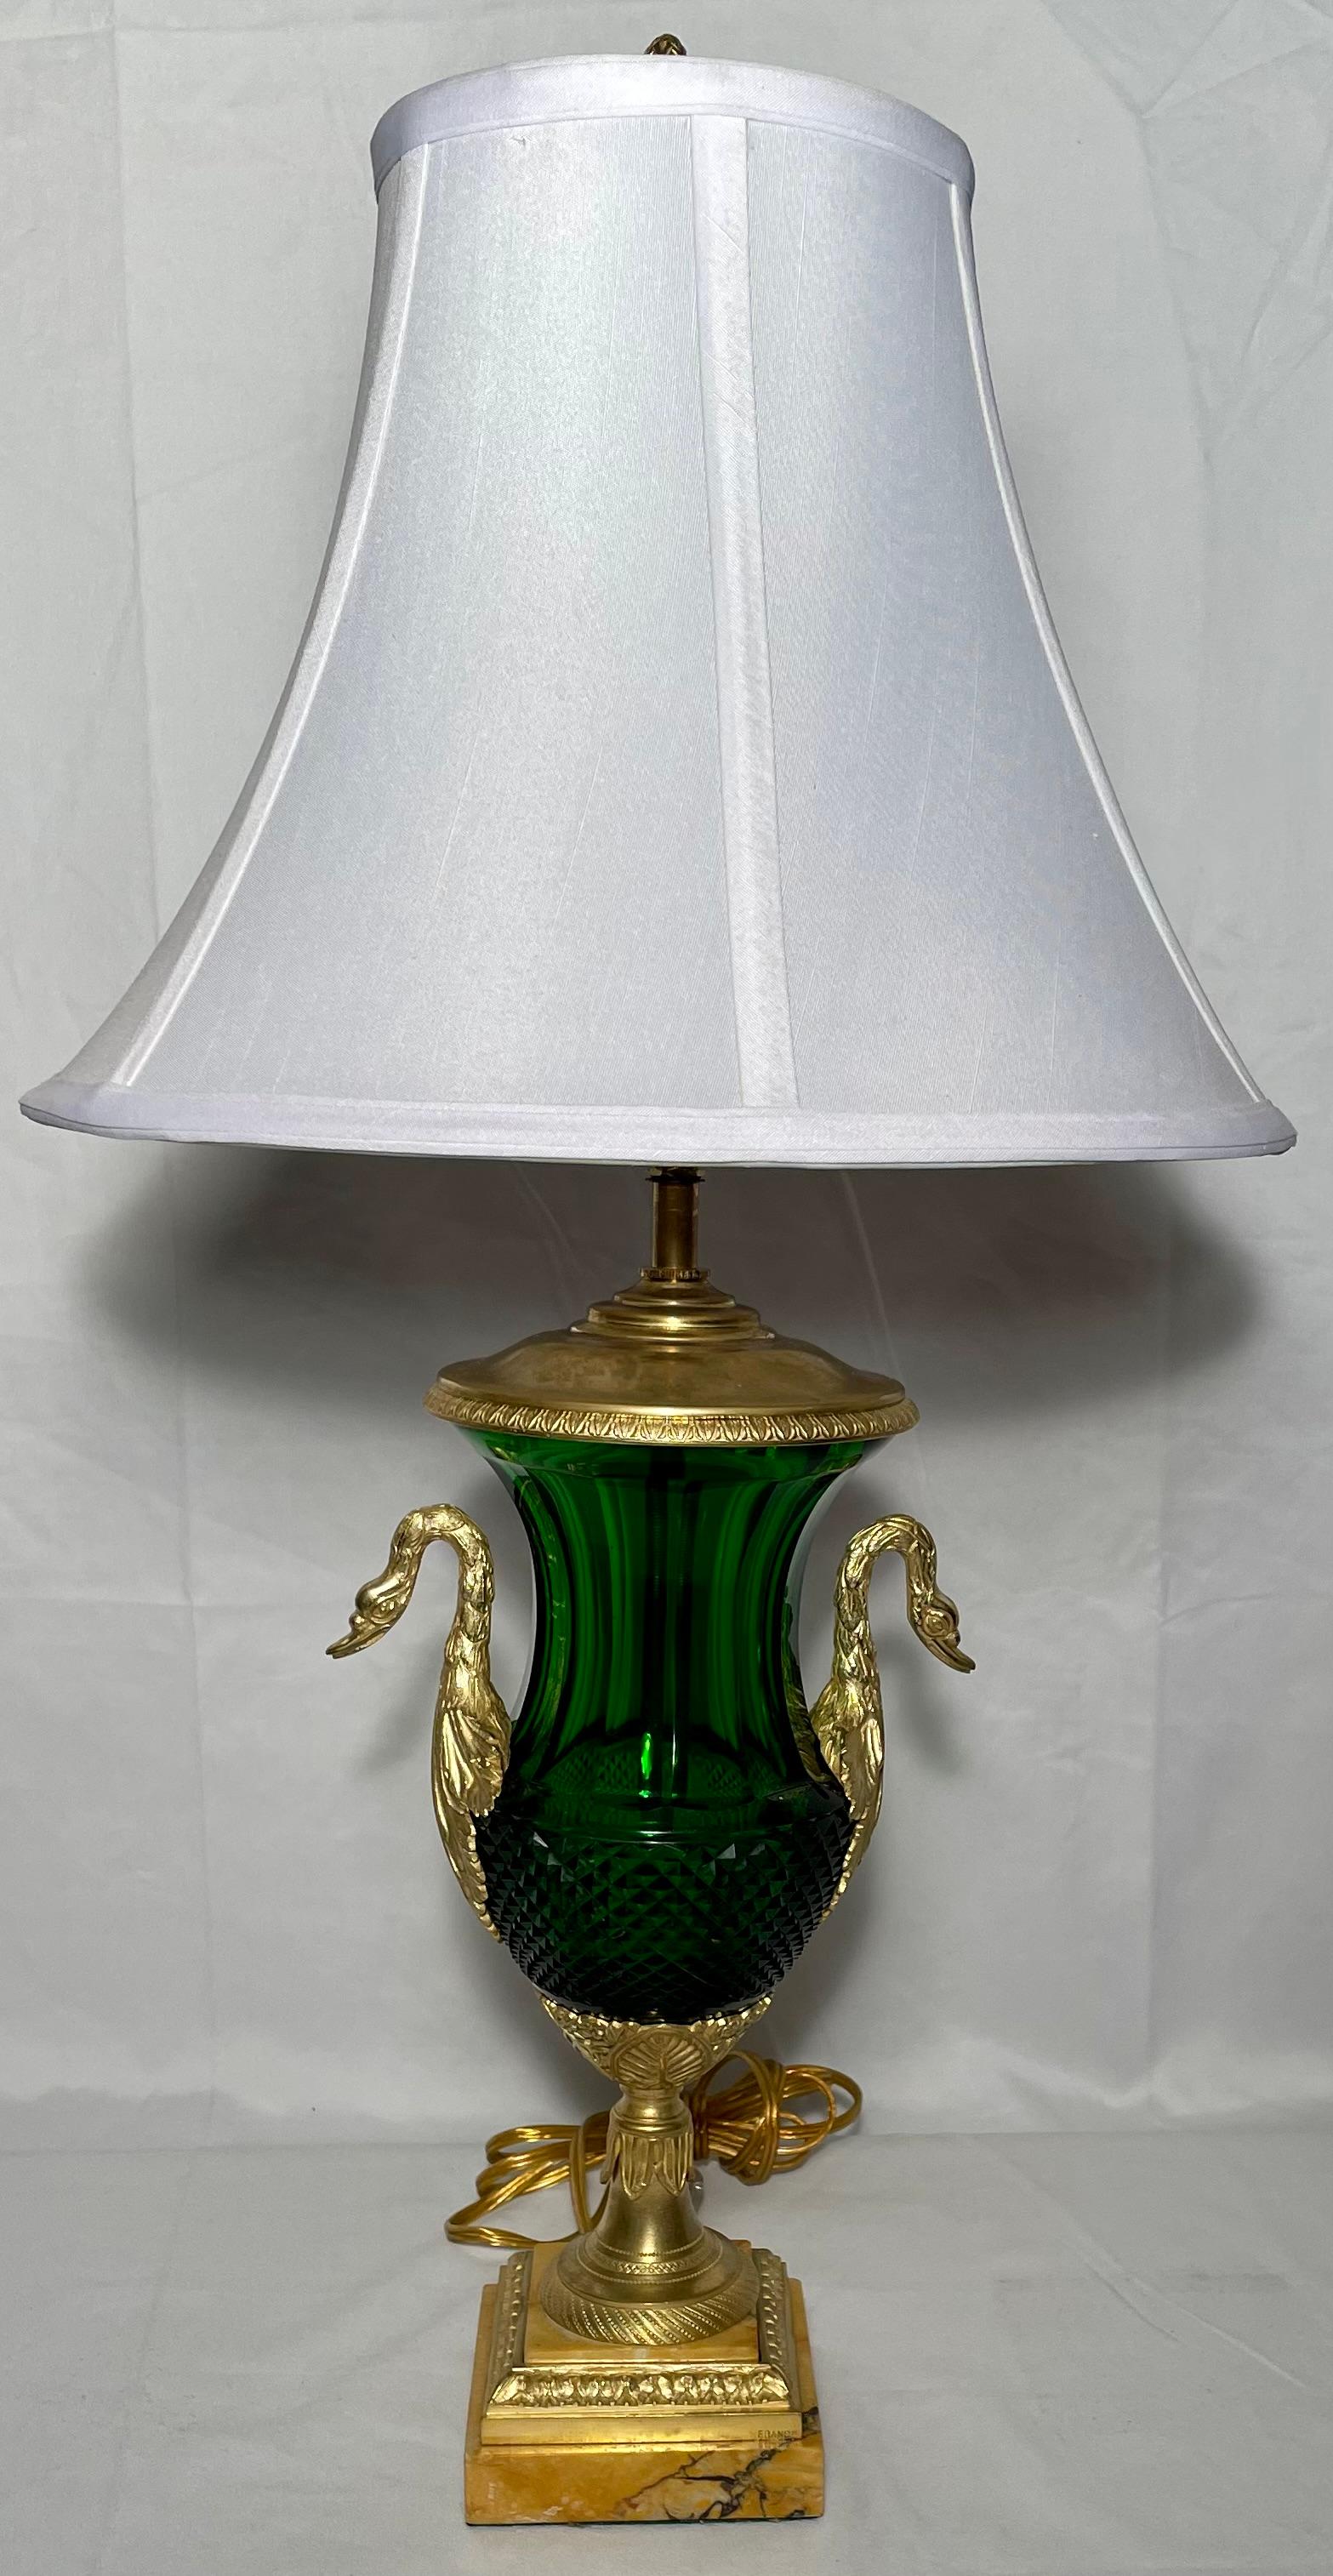 Pair antique French emerald color baccarat crystal lamps with gold bronze mounts and marble bases, circa 1890-1900.